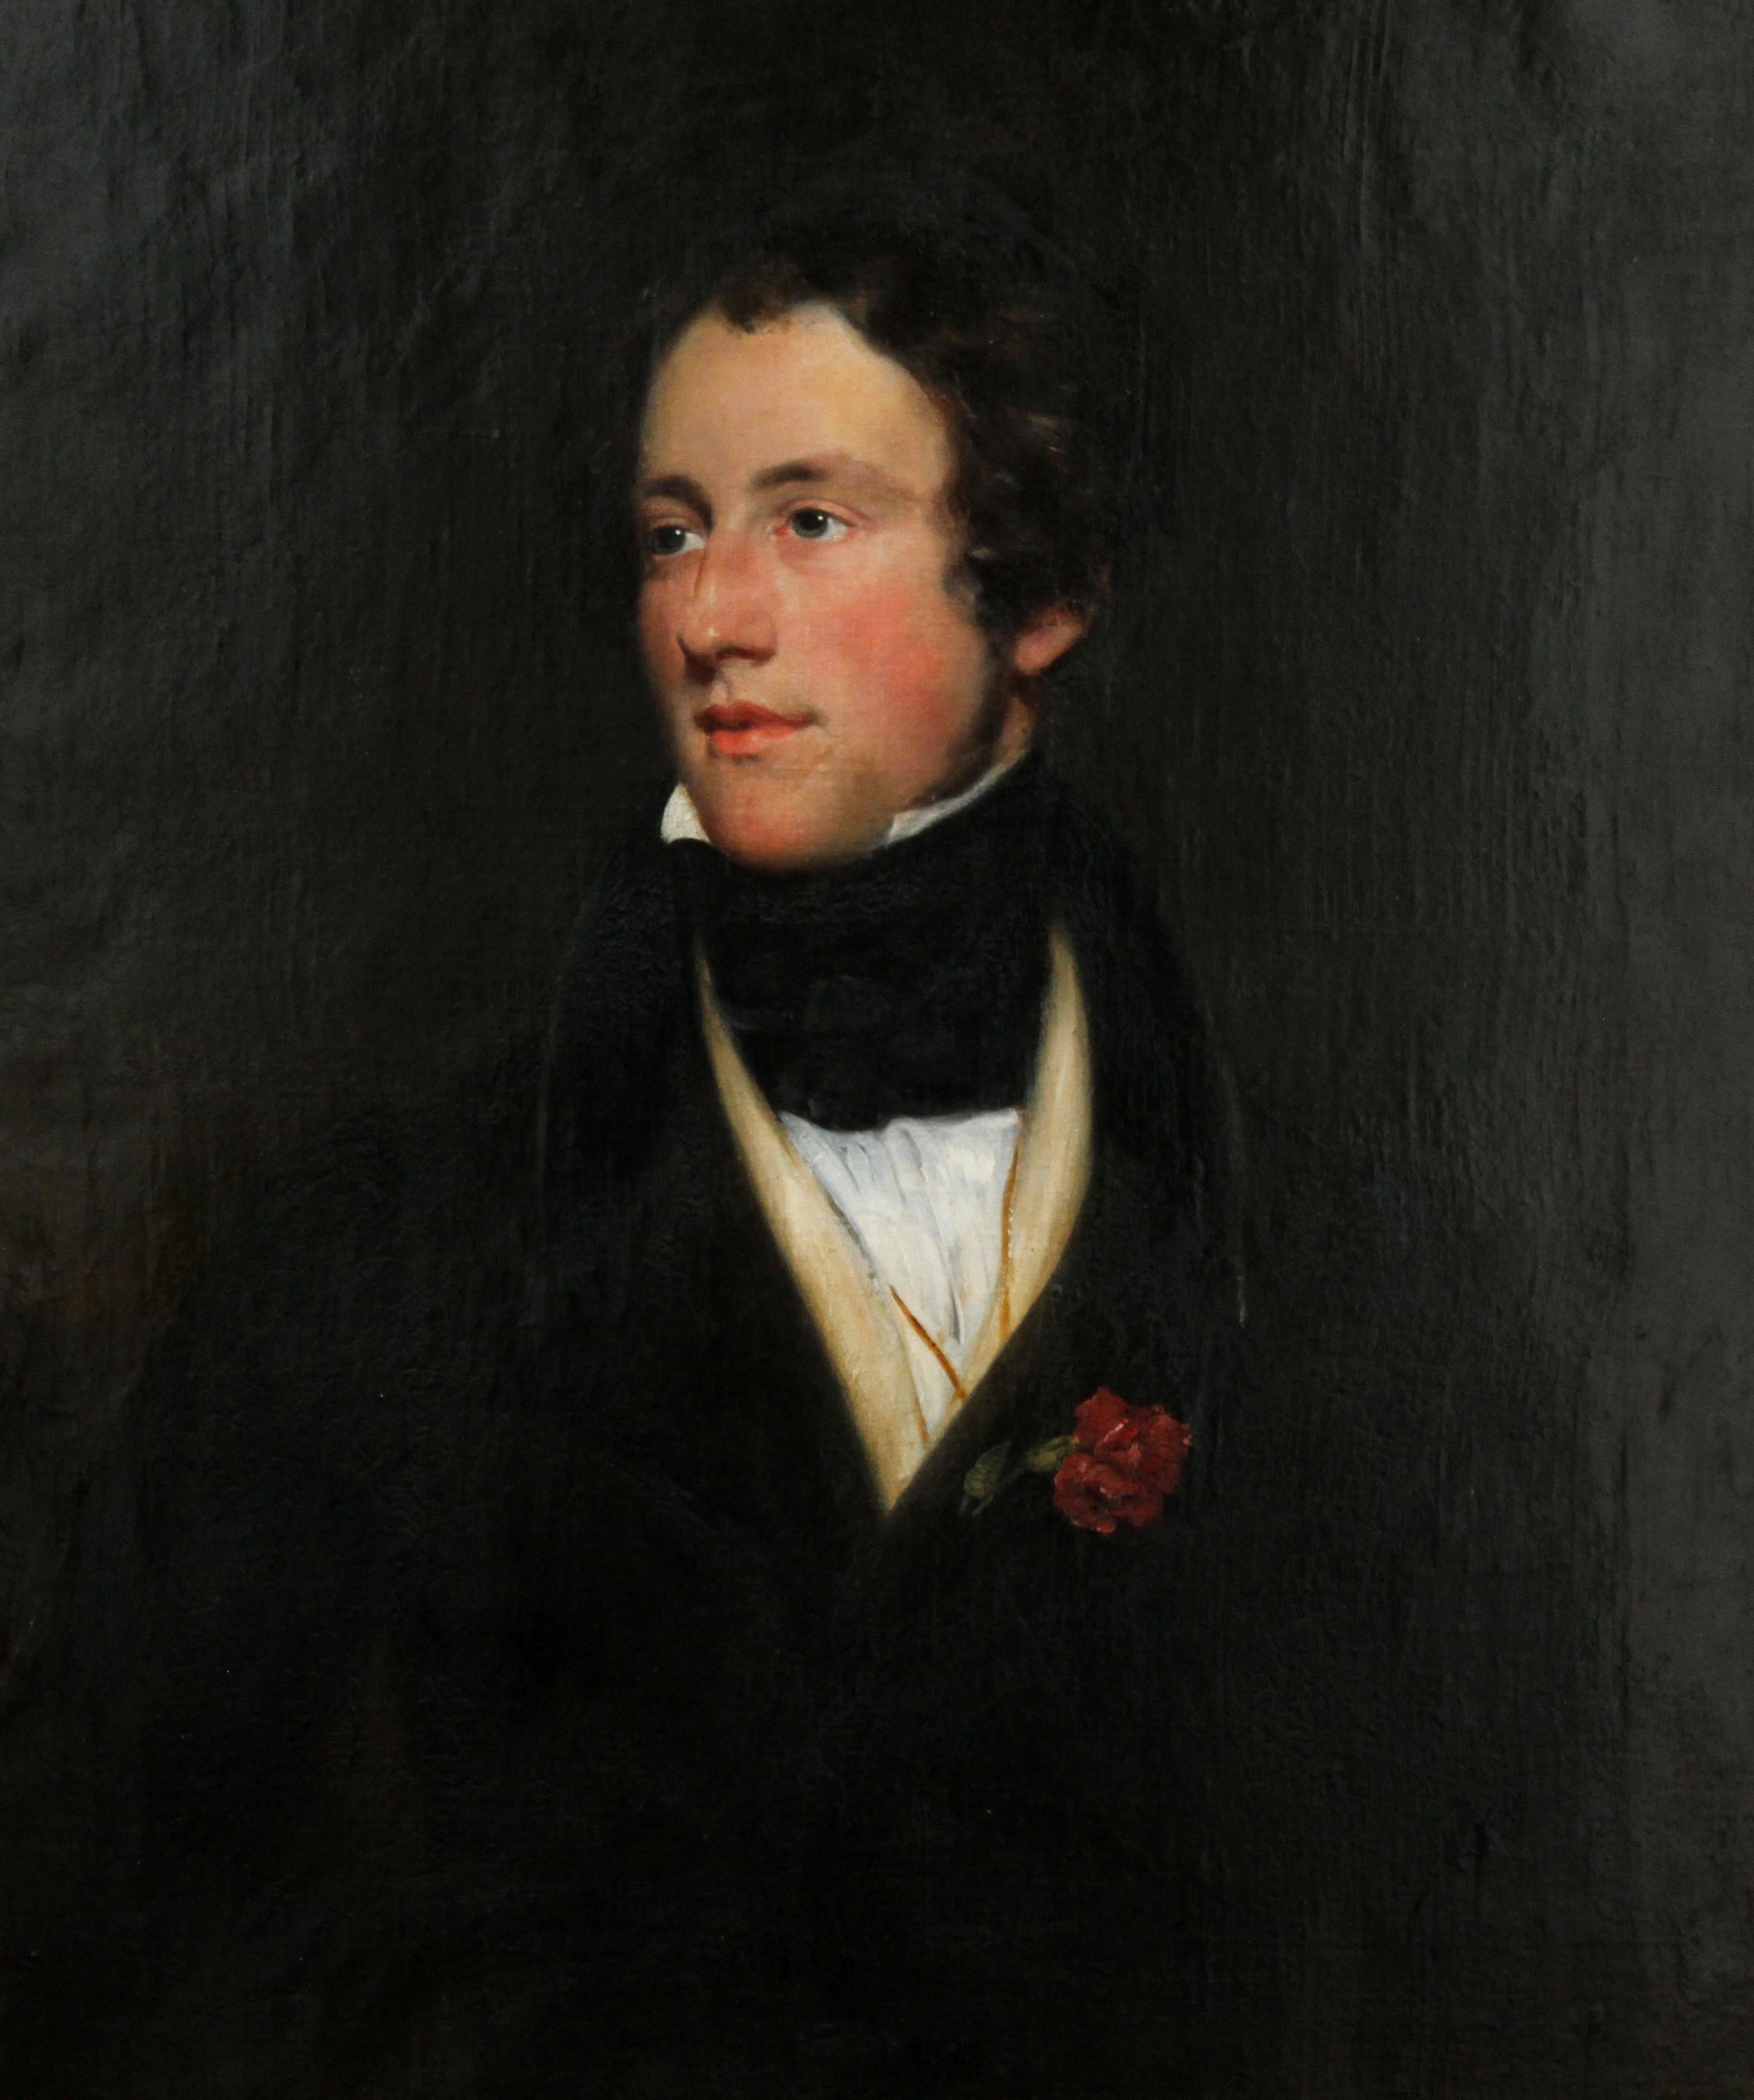 Portrait of a Gentleman - British Regency art 1820 male portrait oil painting  - Painting by Thomas Lawrence (circle)